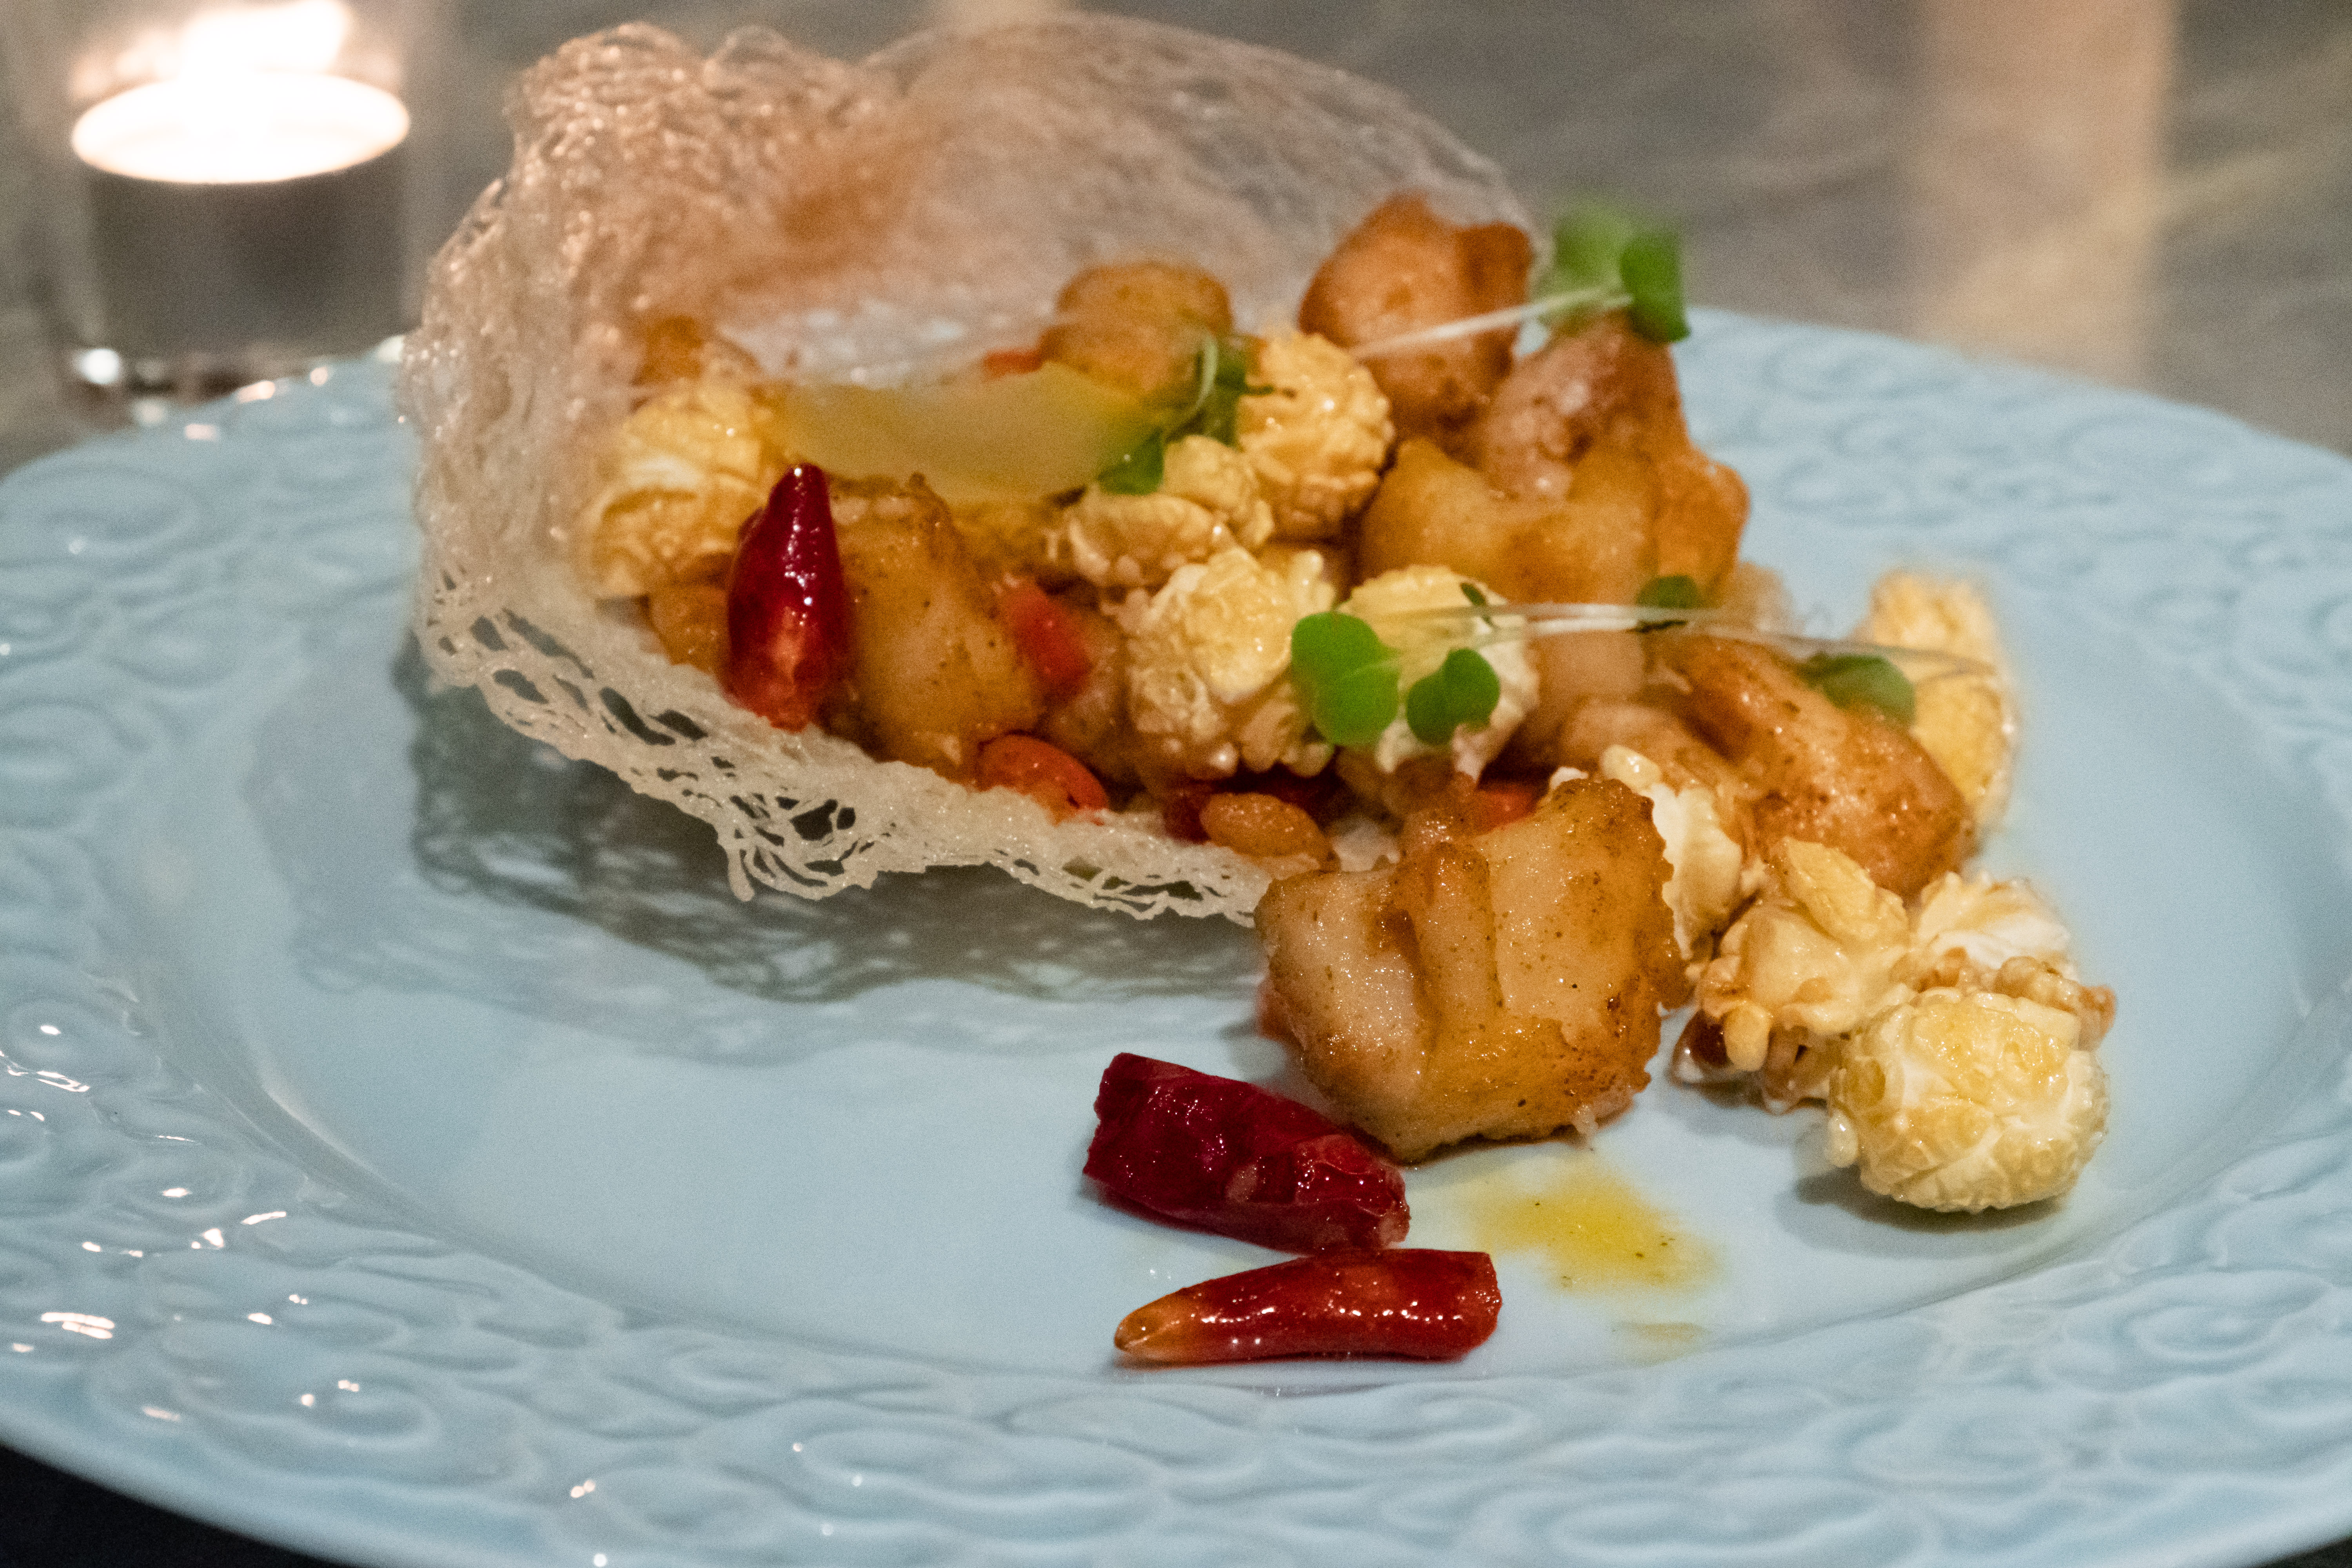 Fang Fang’s signature spicy popcorn chicken. Photo by Tomas Wiik.